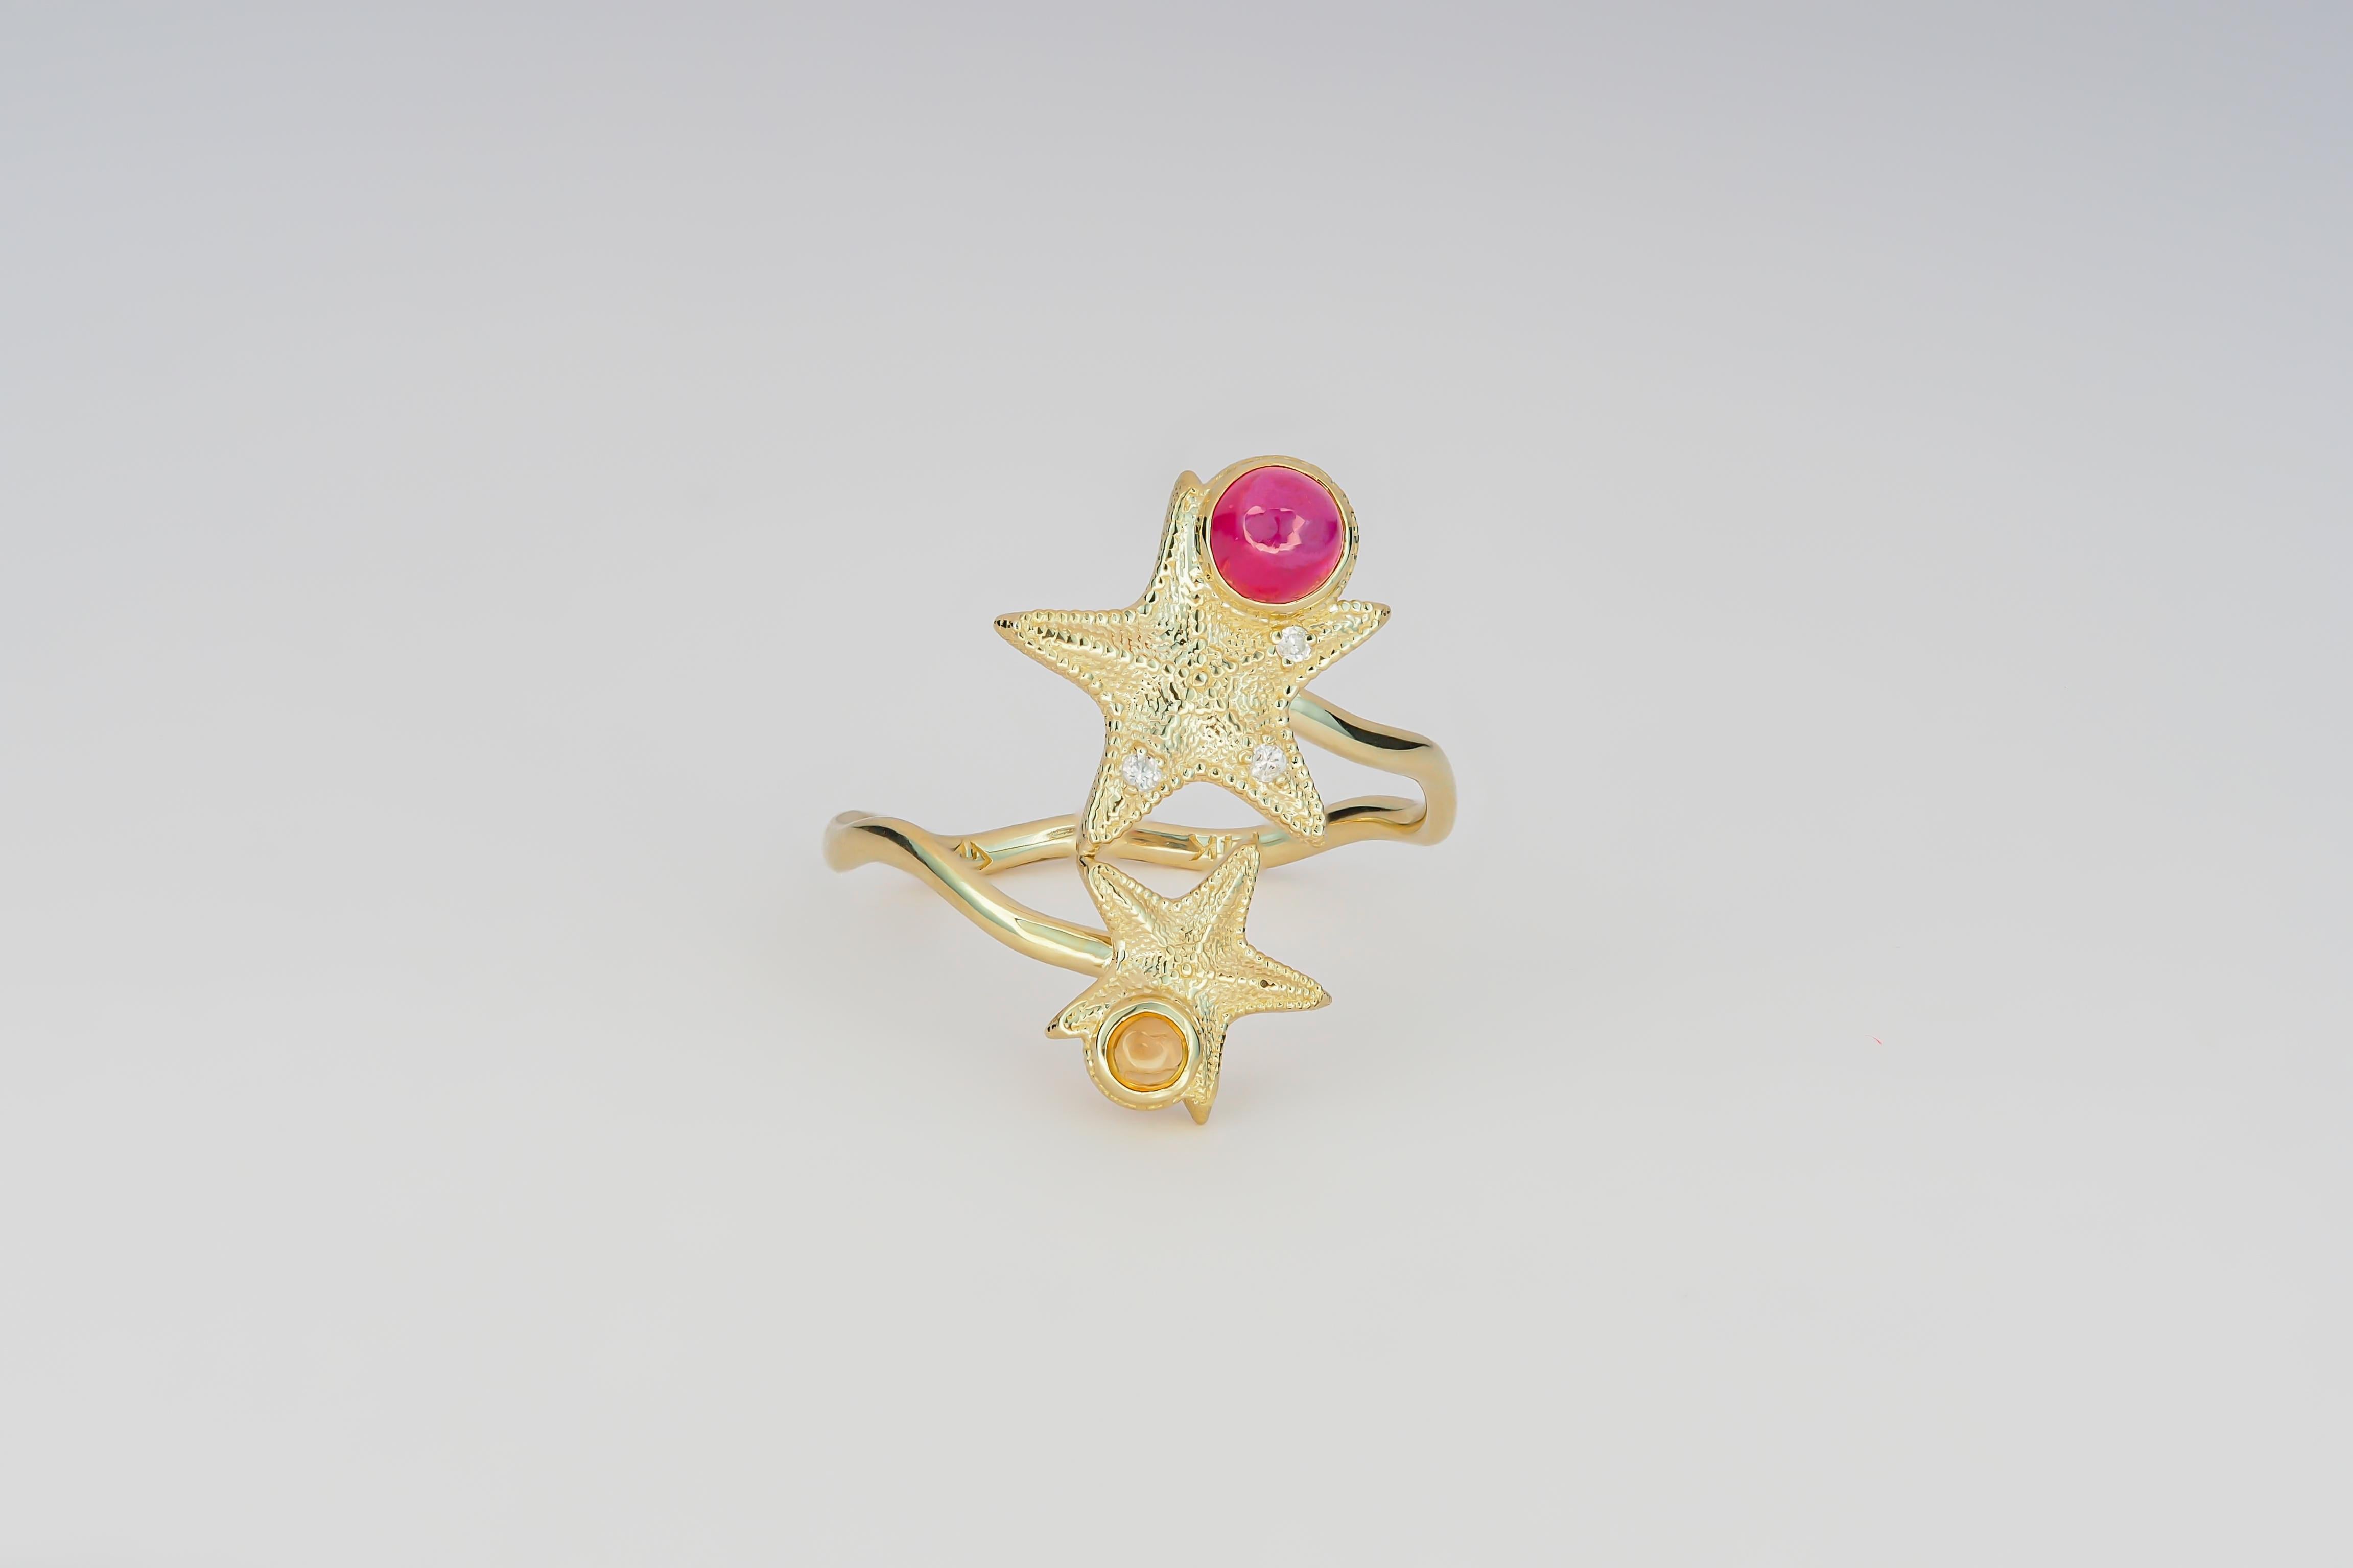 For Sale:   Ruby and Sapphire cabochon ring in 14 karat gold.  Star Fish Ring! 3